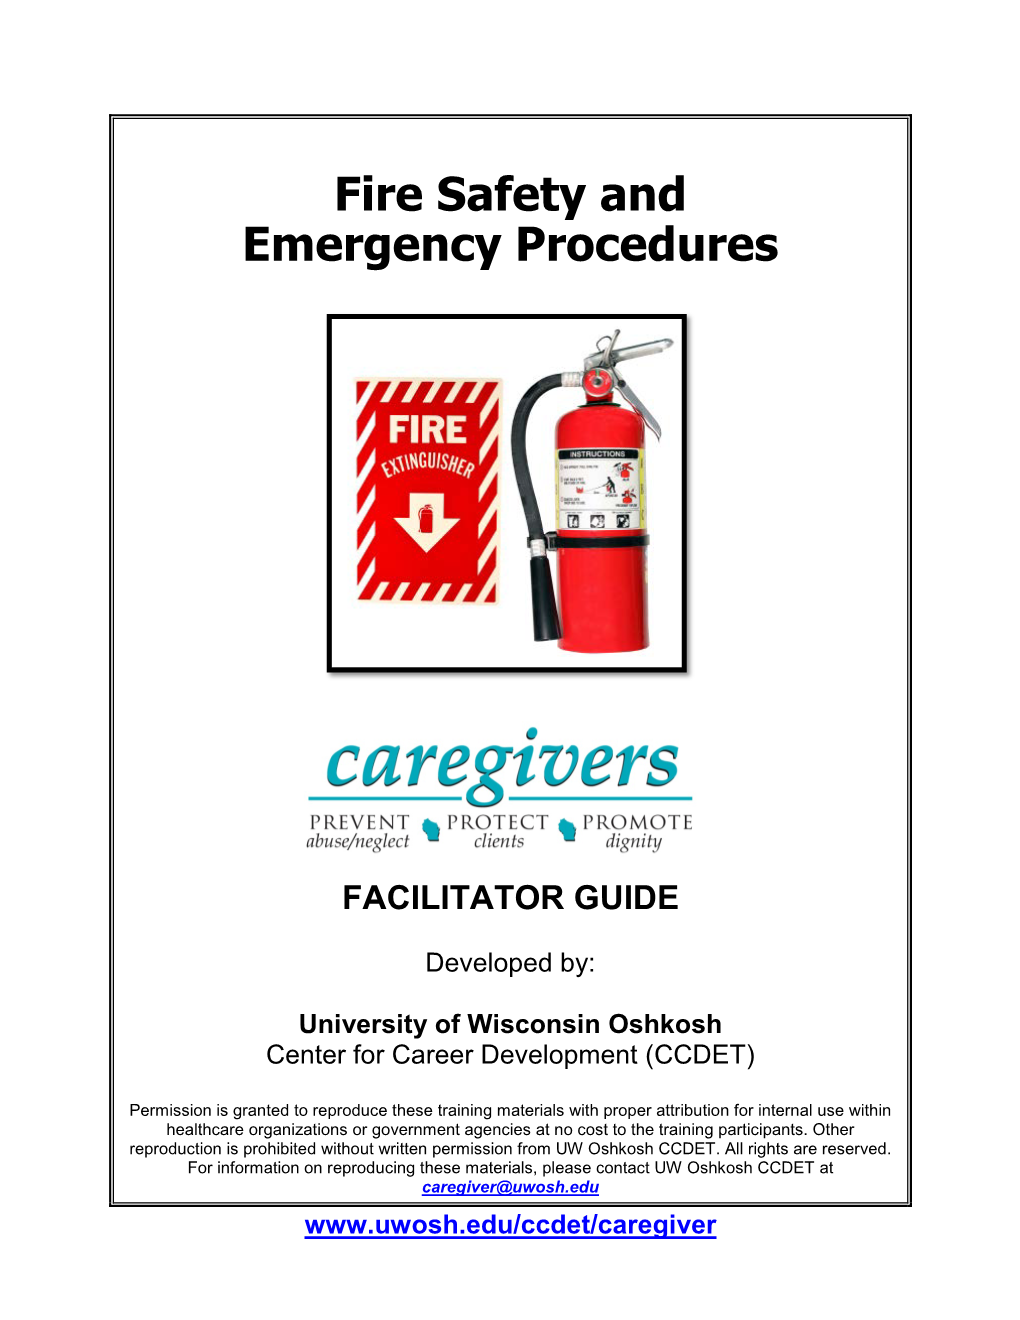 Fire Safety and Emergency Procedures